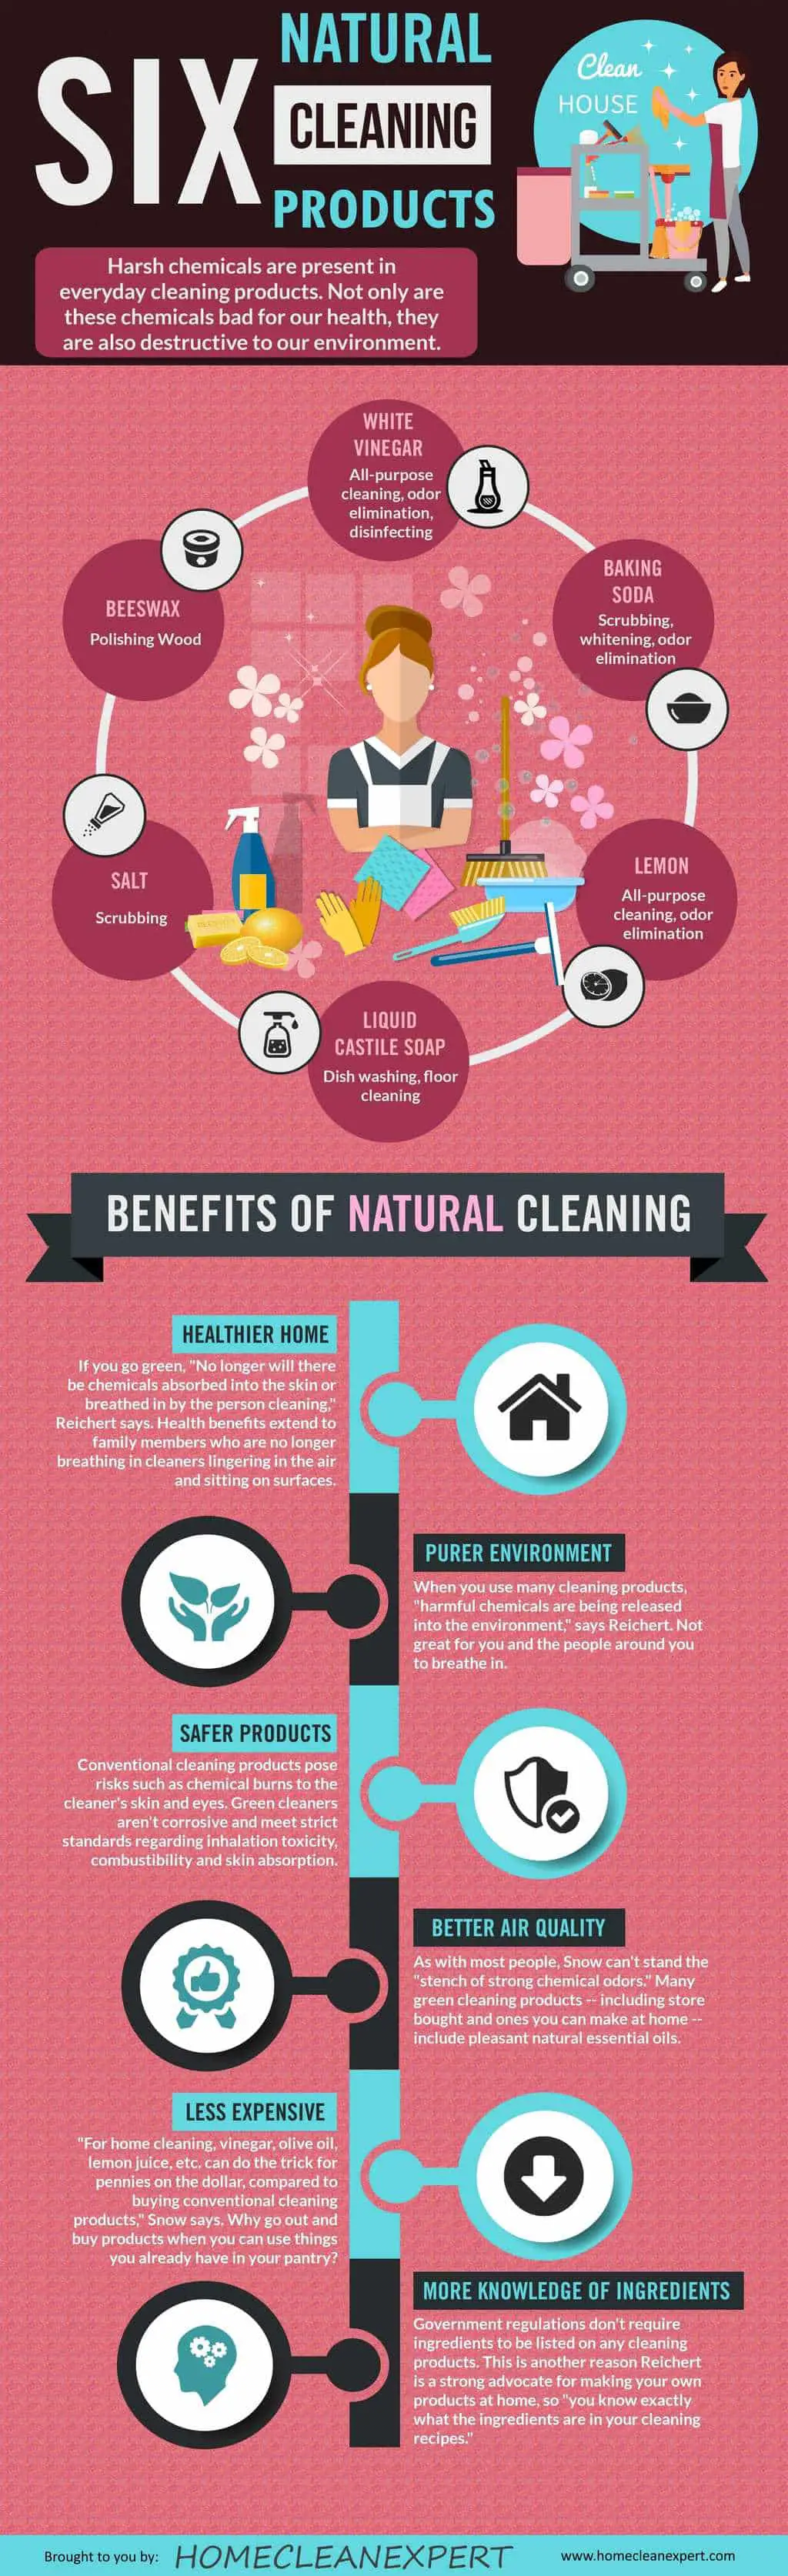 6 natural cleaning products infographic